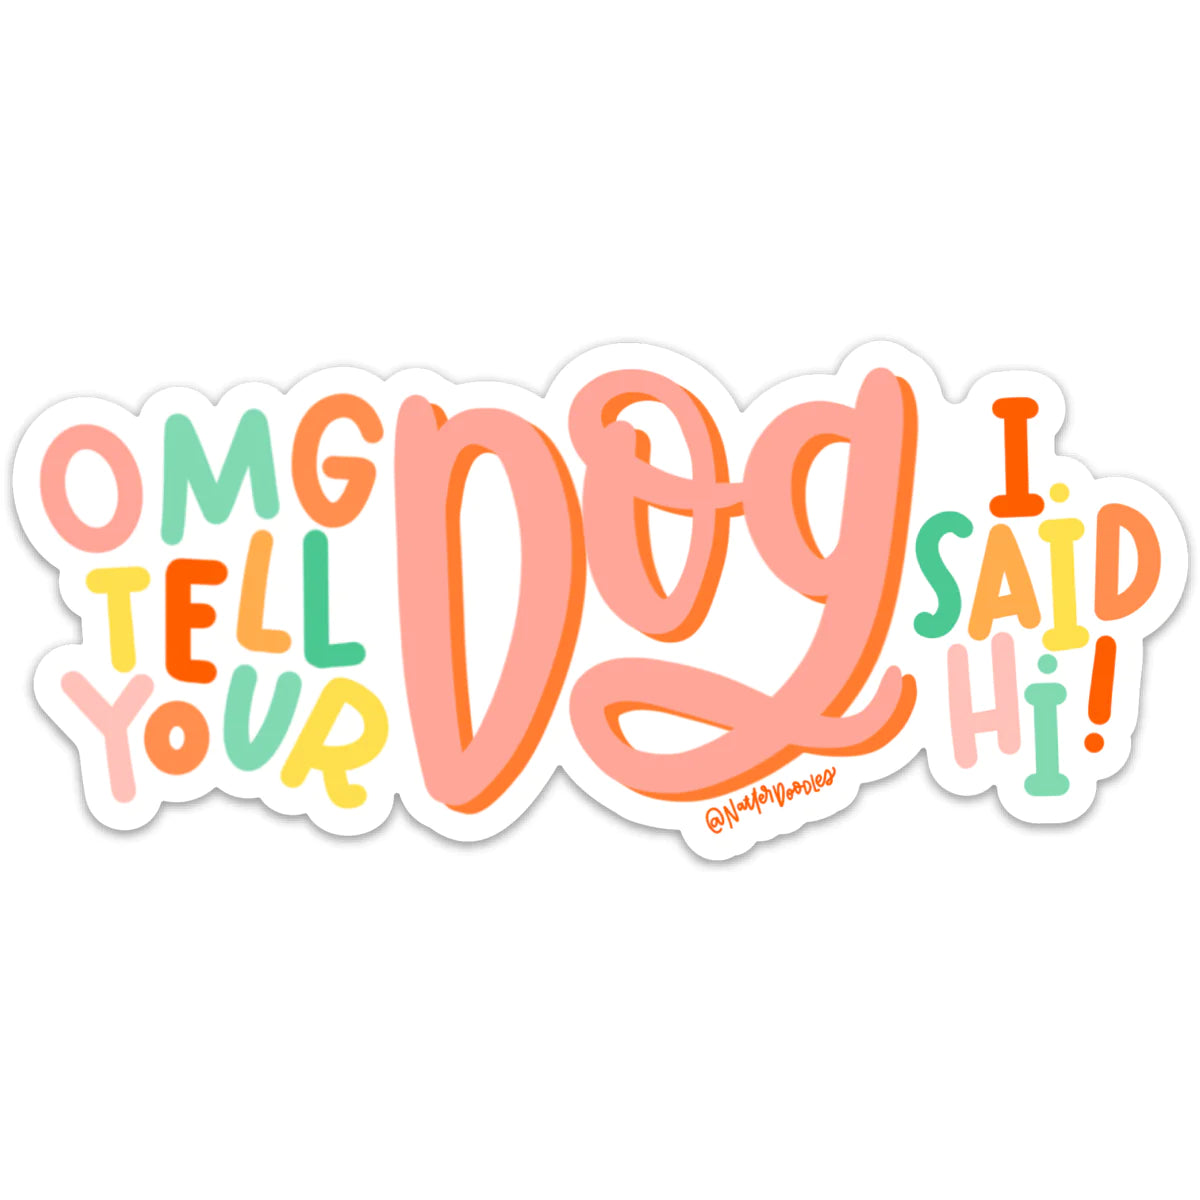 OMG Tell Your Dog Hi! - Sticker by NatterDoodle